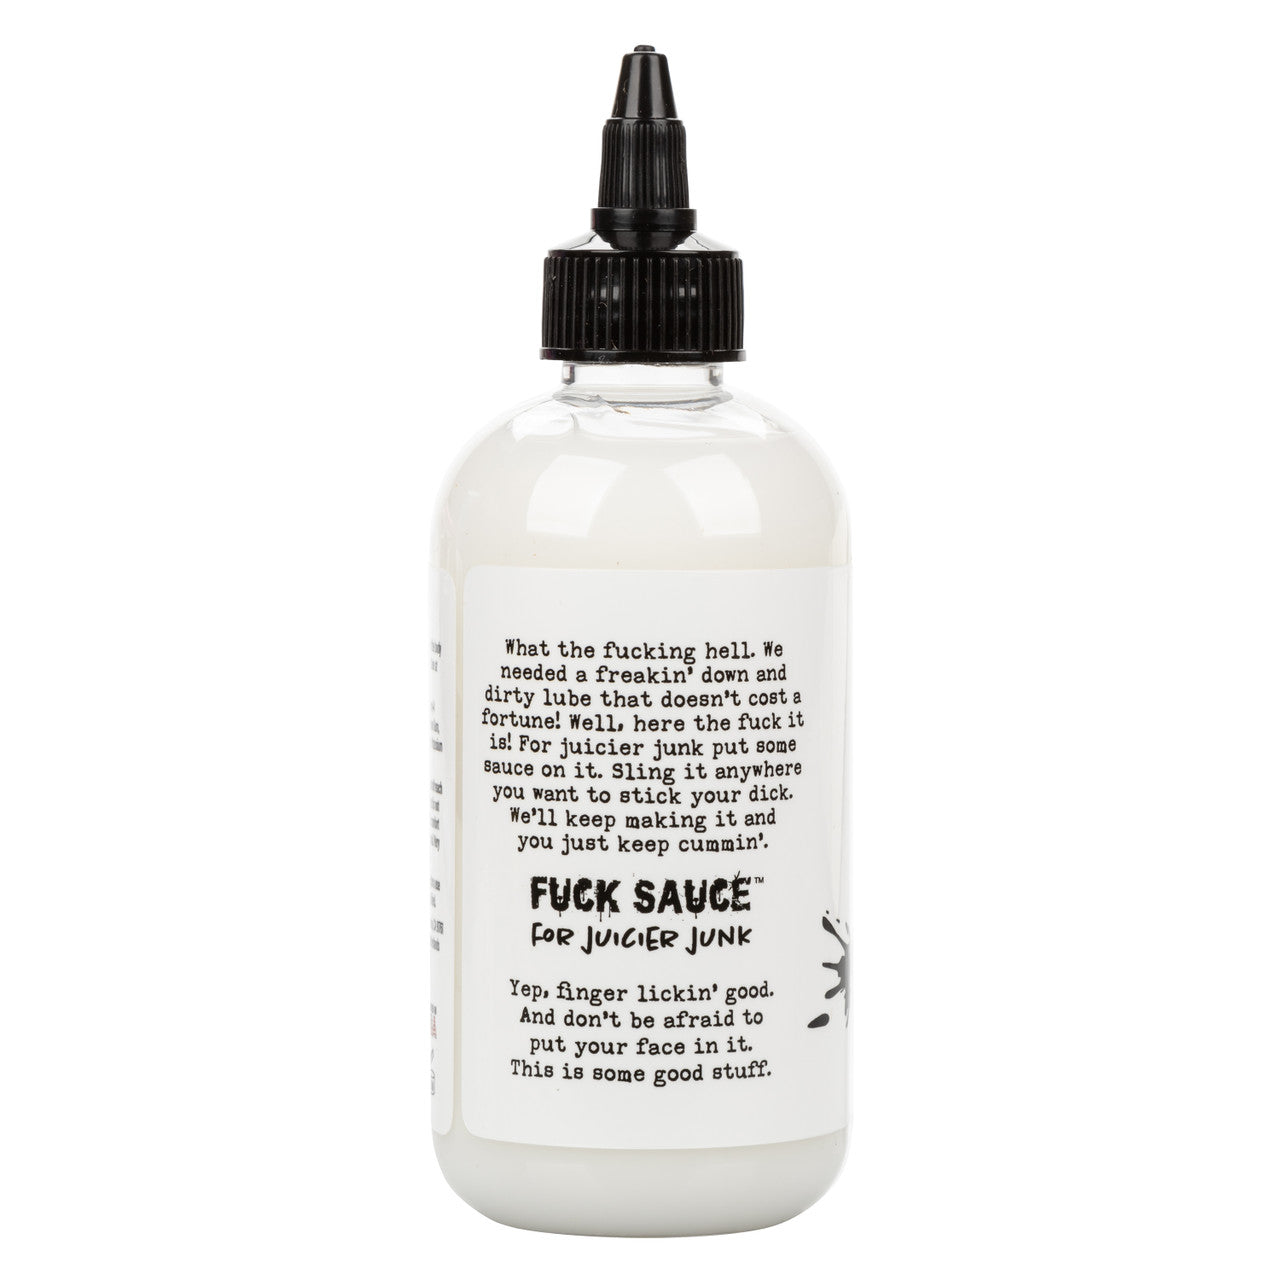 Fuck Sauce Cum Scented Personal Lubricant - 8 fl. oz. - Thorn & Feather Sex Toy Canada